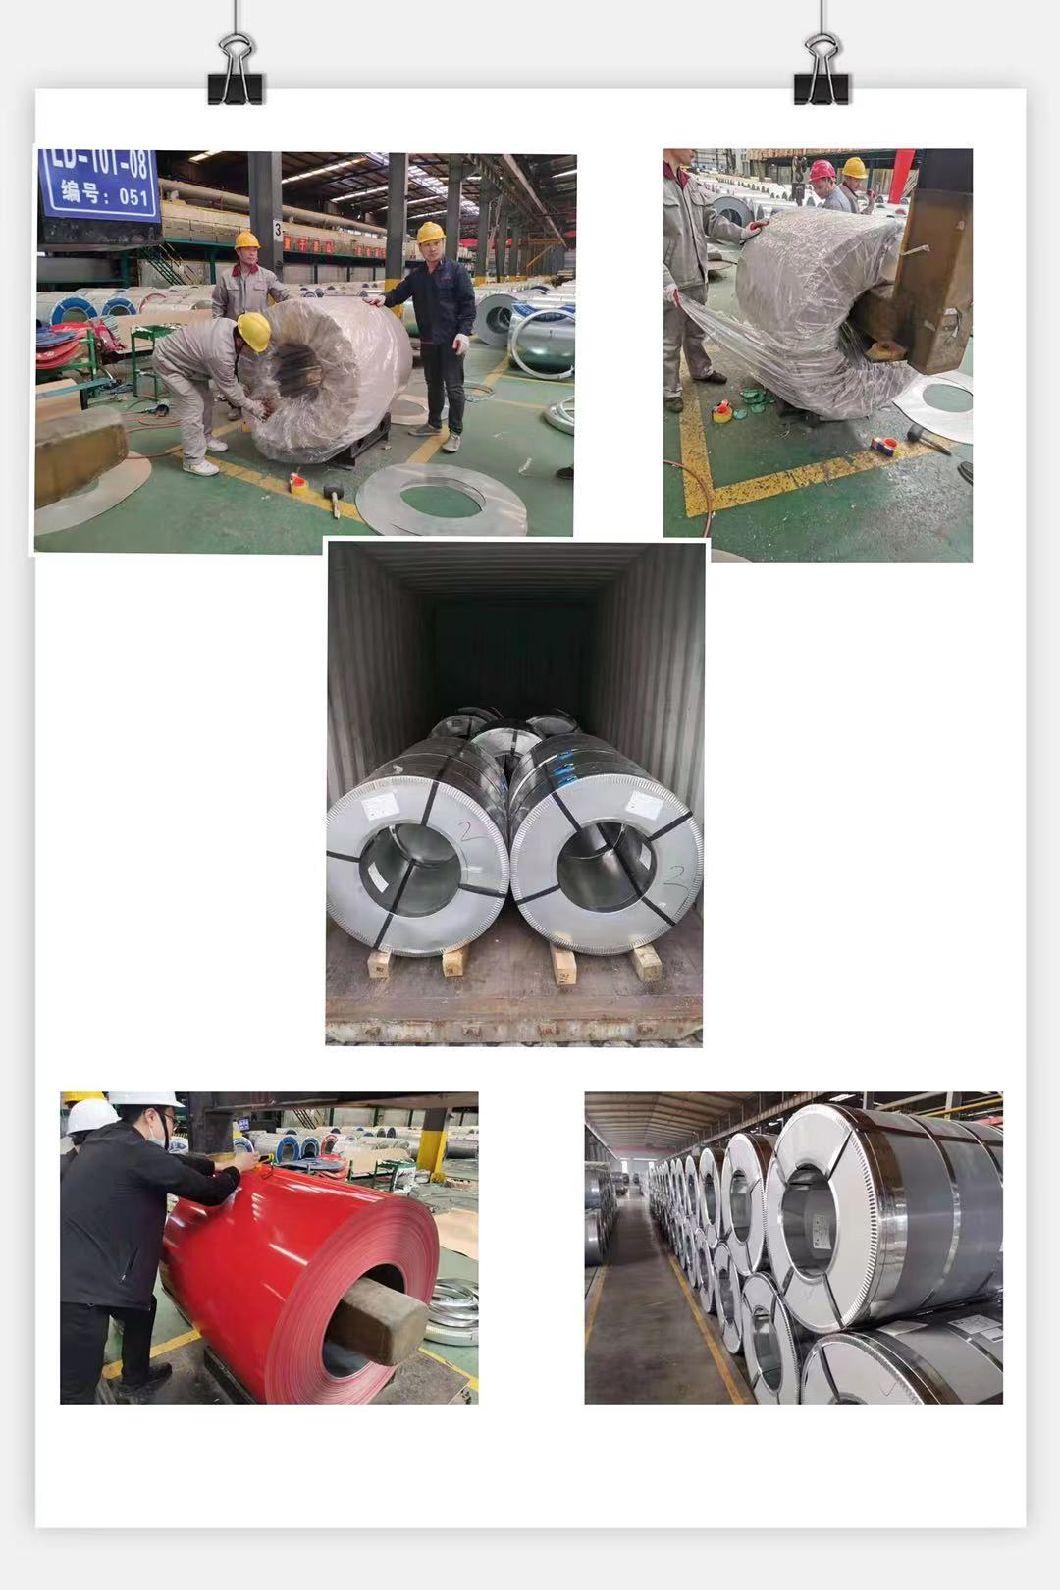 Hot Rolled Coil Steel / Galvanized Steel Coil